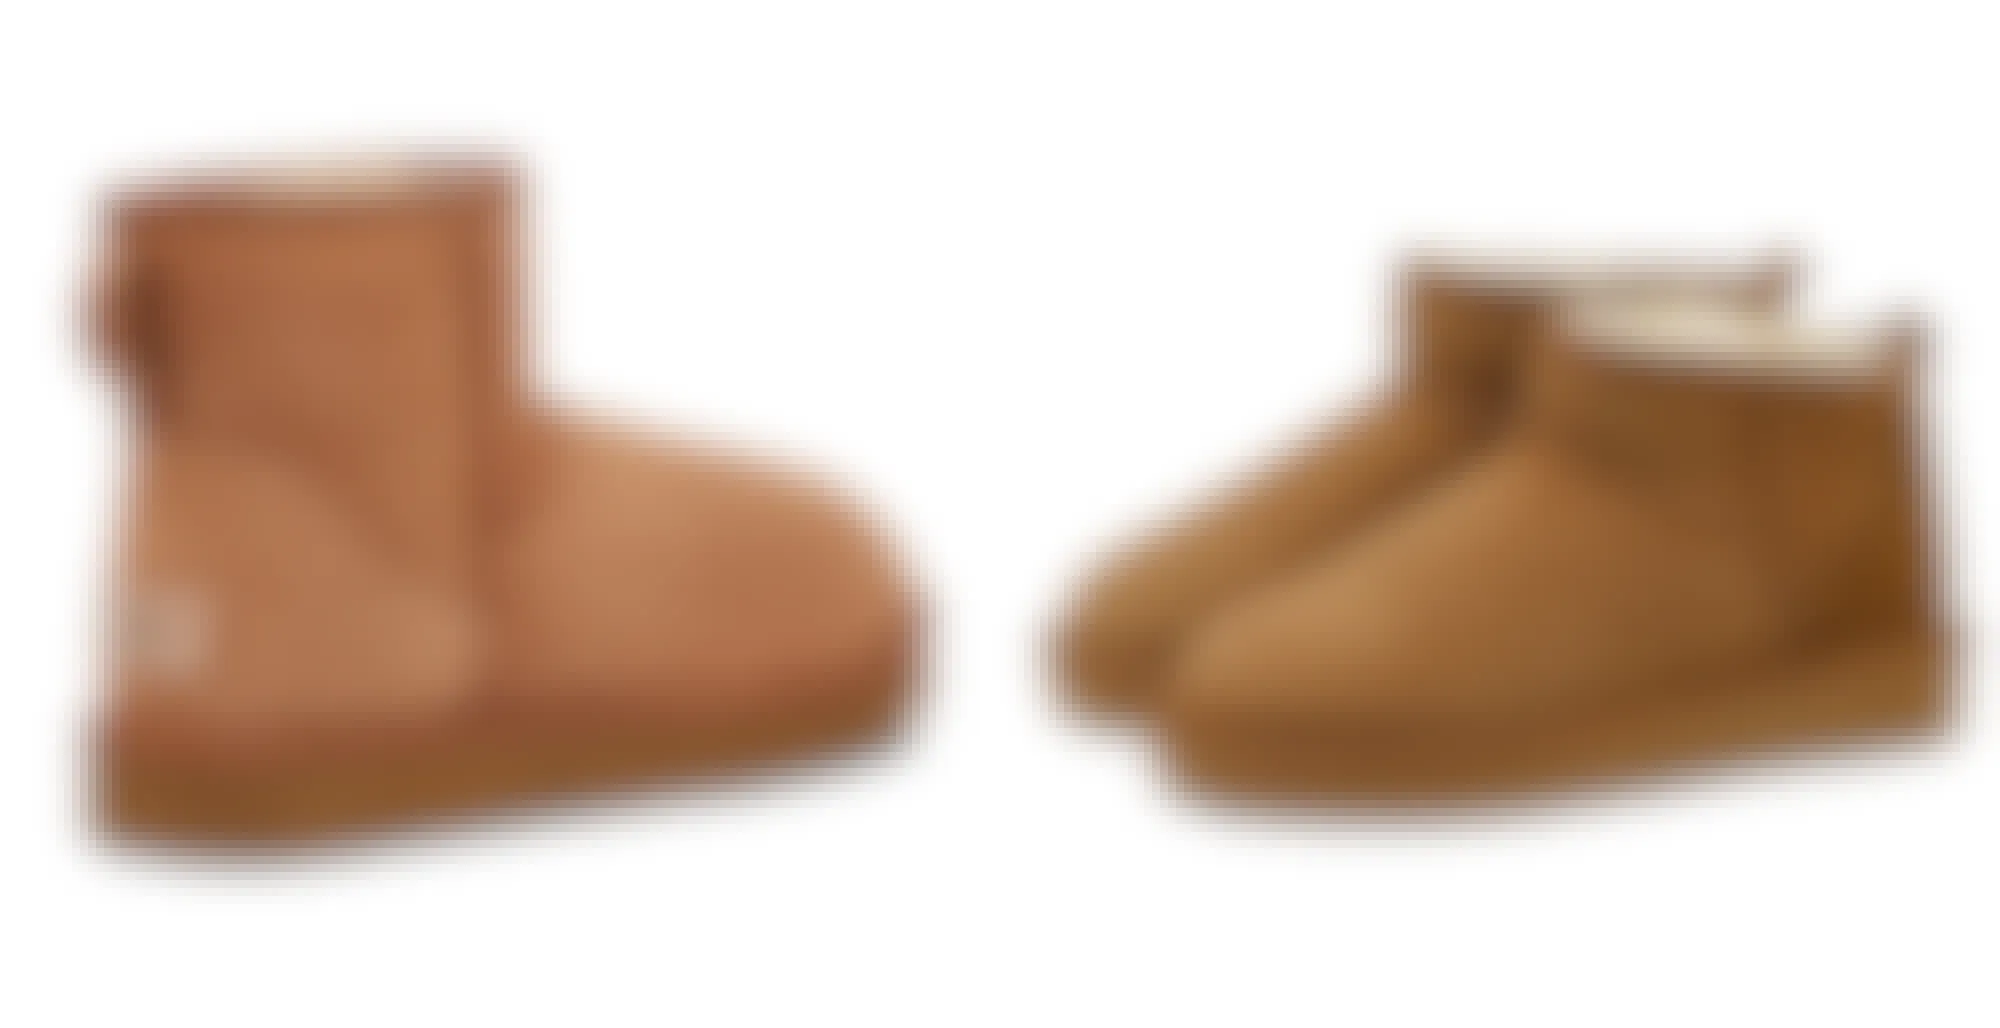 This $36 Ugg Lookalike Looks Just Like the Real Thing